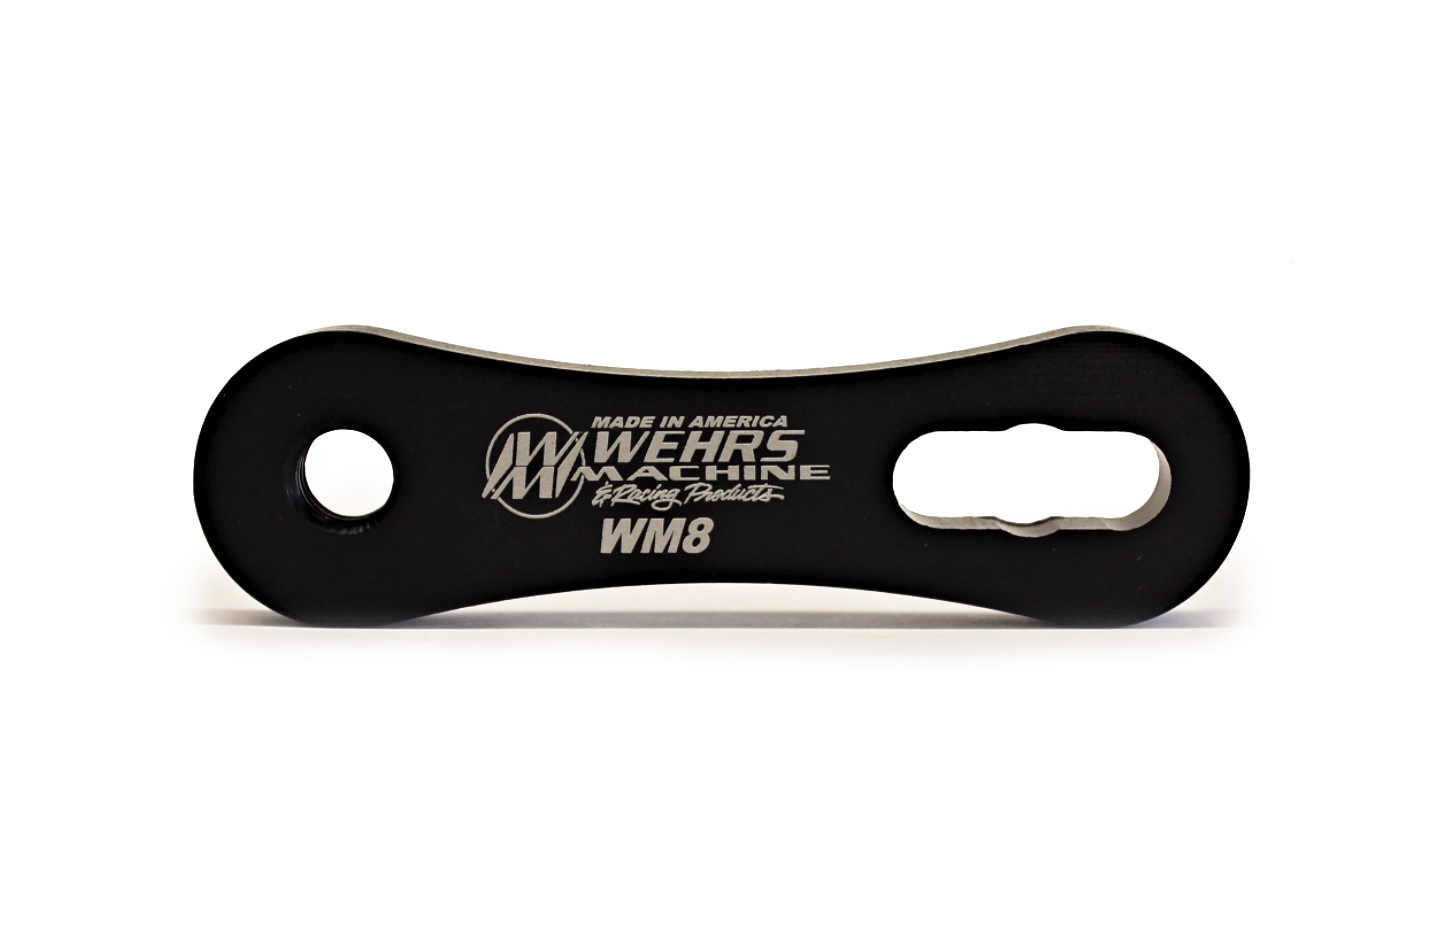 Wehrs Machine WM8 Shifter Arm, 3/8 in Mounting Hole, Saginaw, Aluminum, Black Anodized, Universal, Each